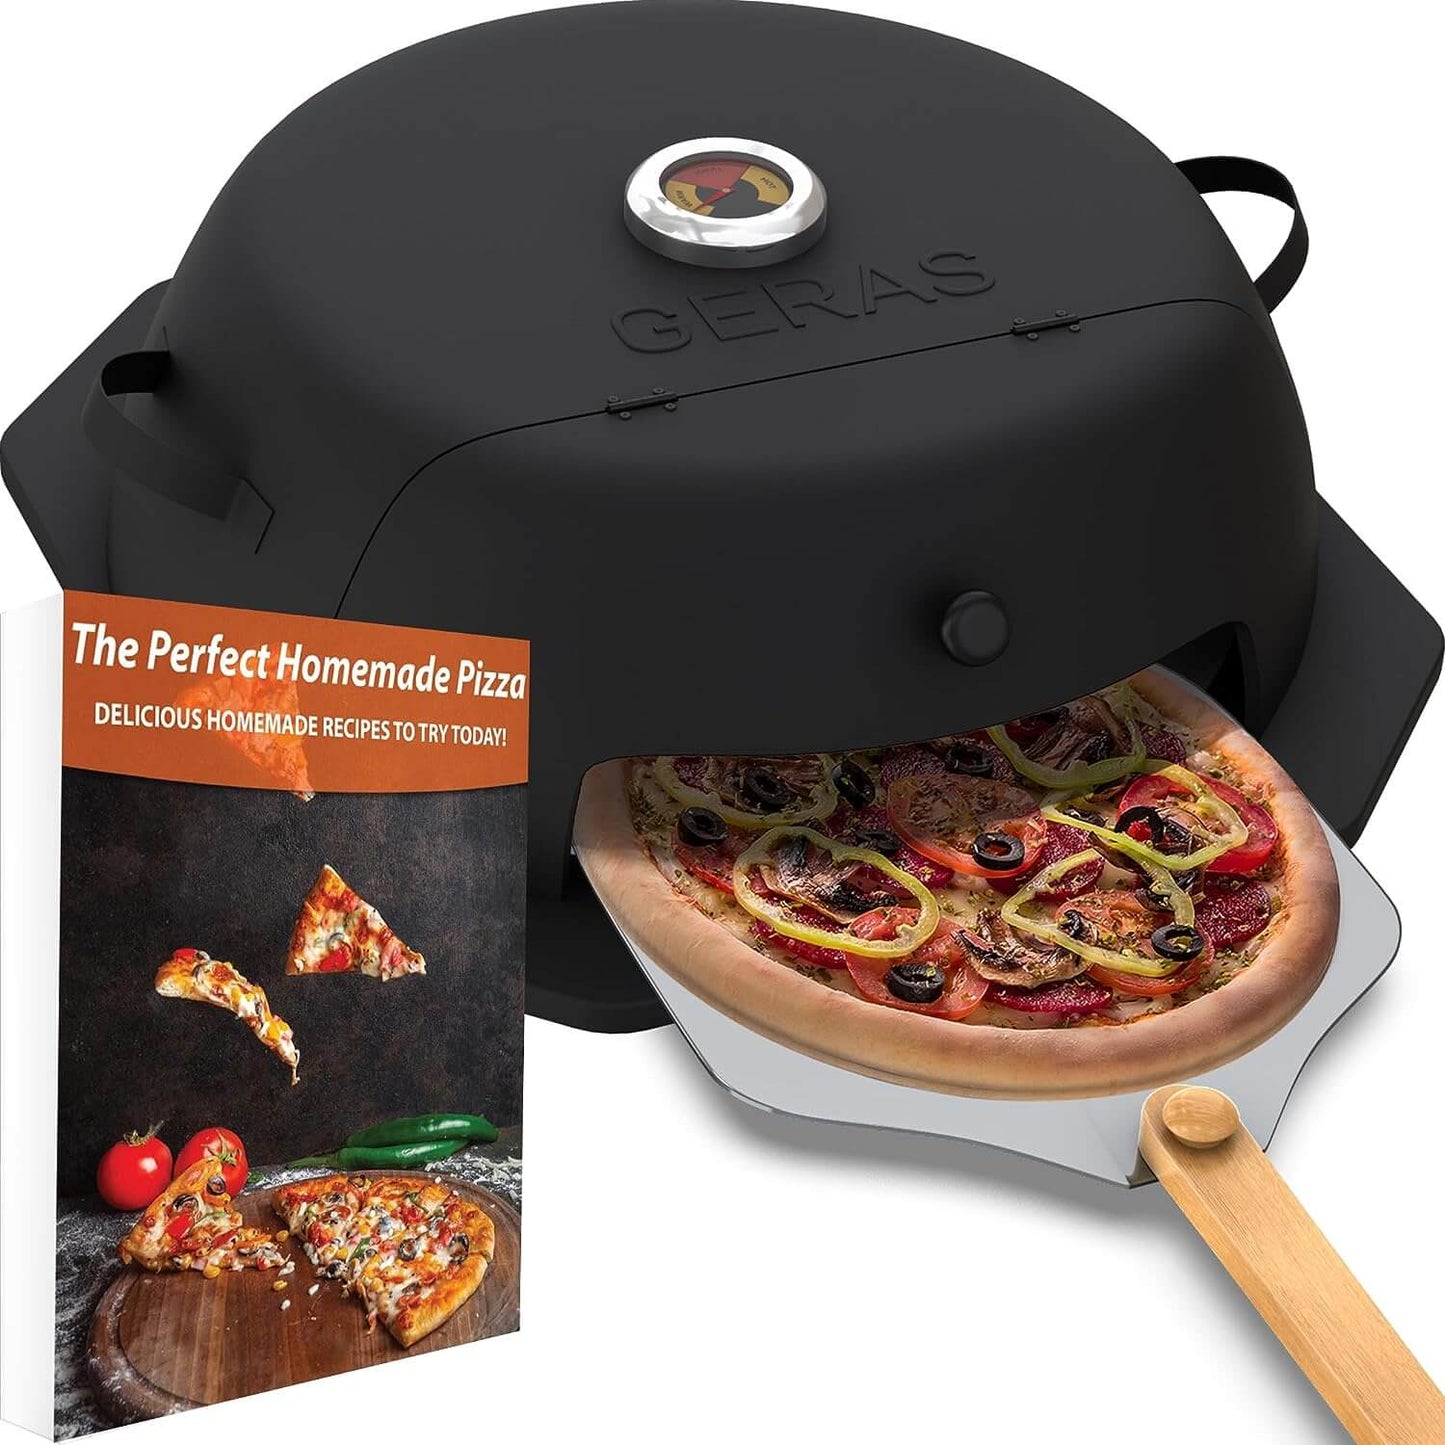 Geras Grill Top Pizza Oven With Pizza Stone and Pizza Peel - Geras Club